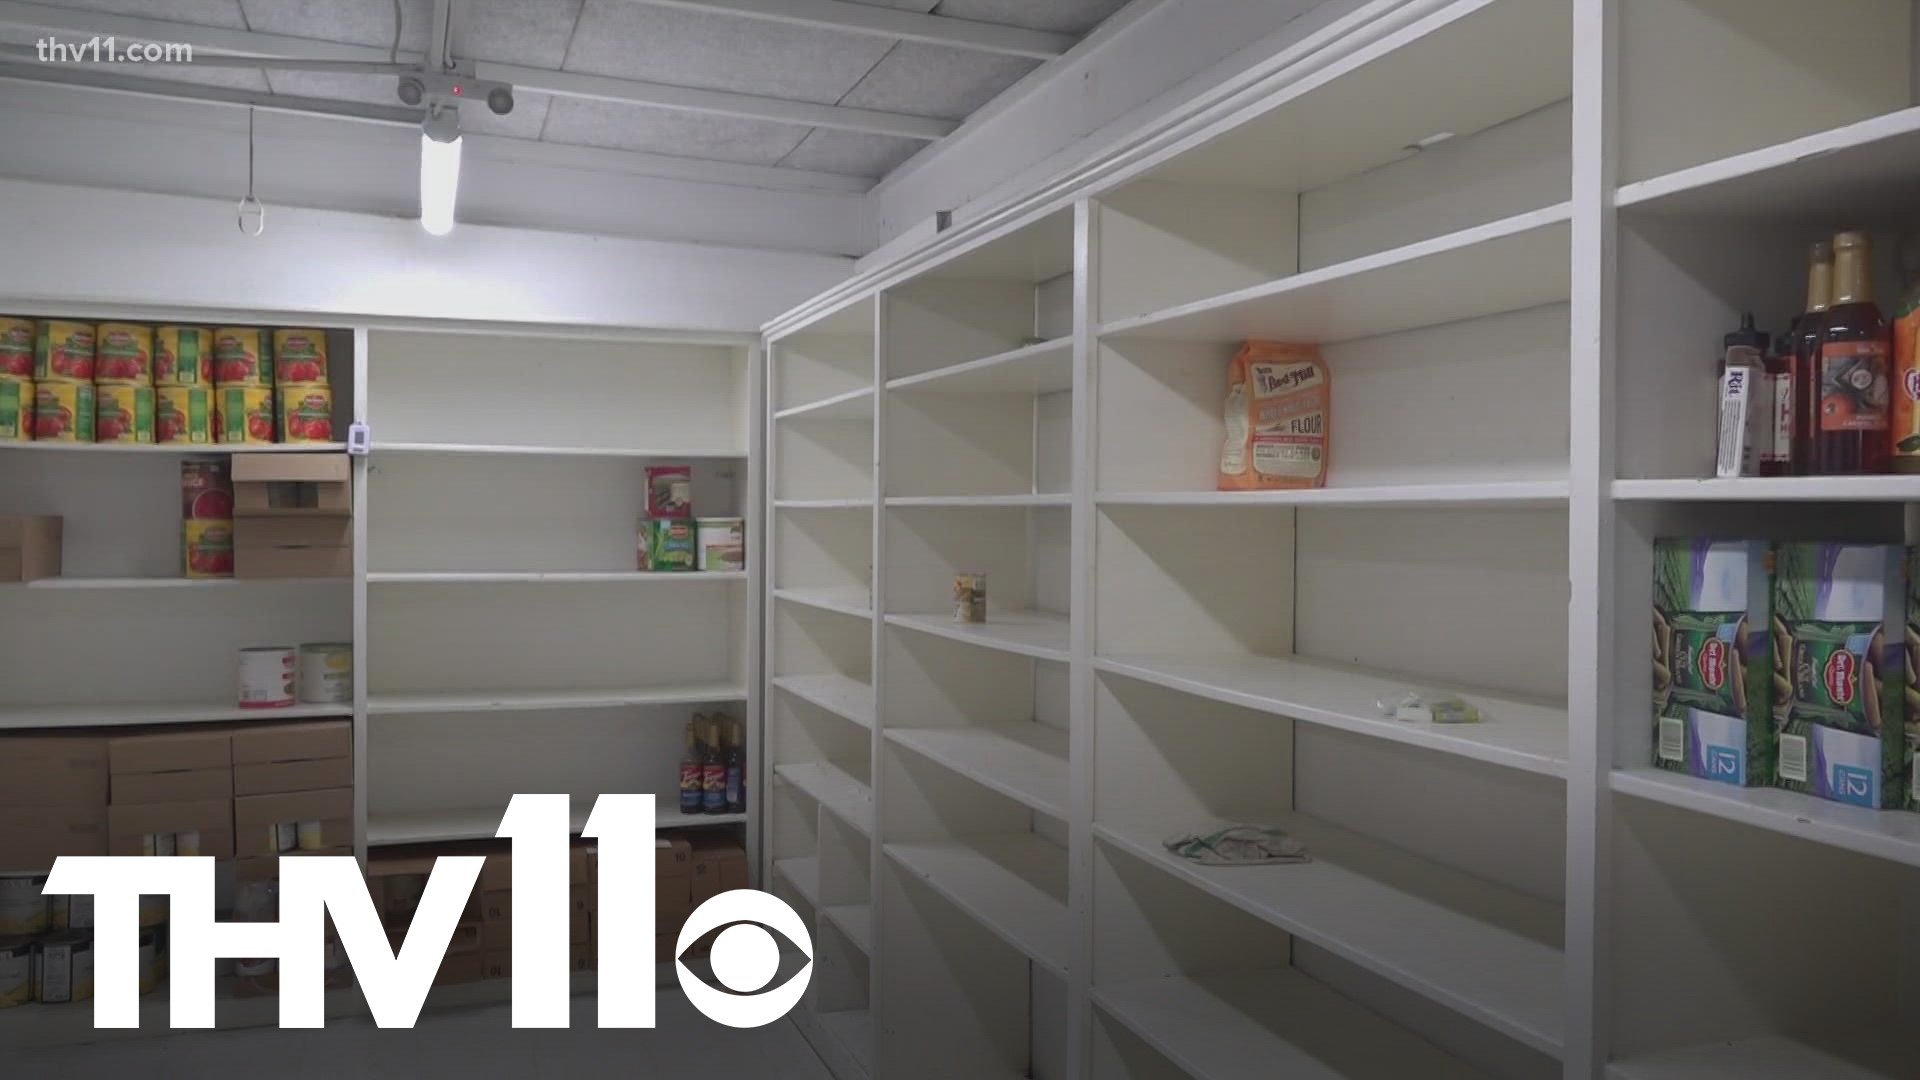 Food pantries have seen an increase in people coming by for a helping hand, and with the holidays in full swing, they've been seeing even more.